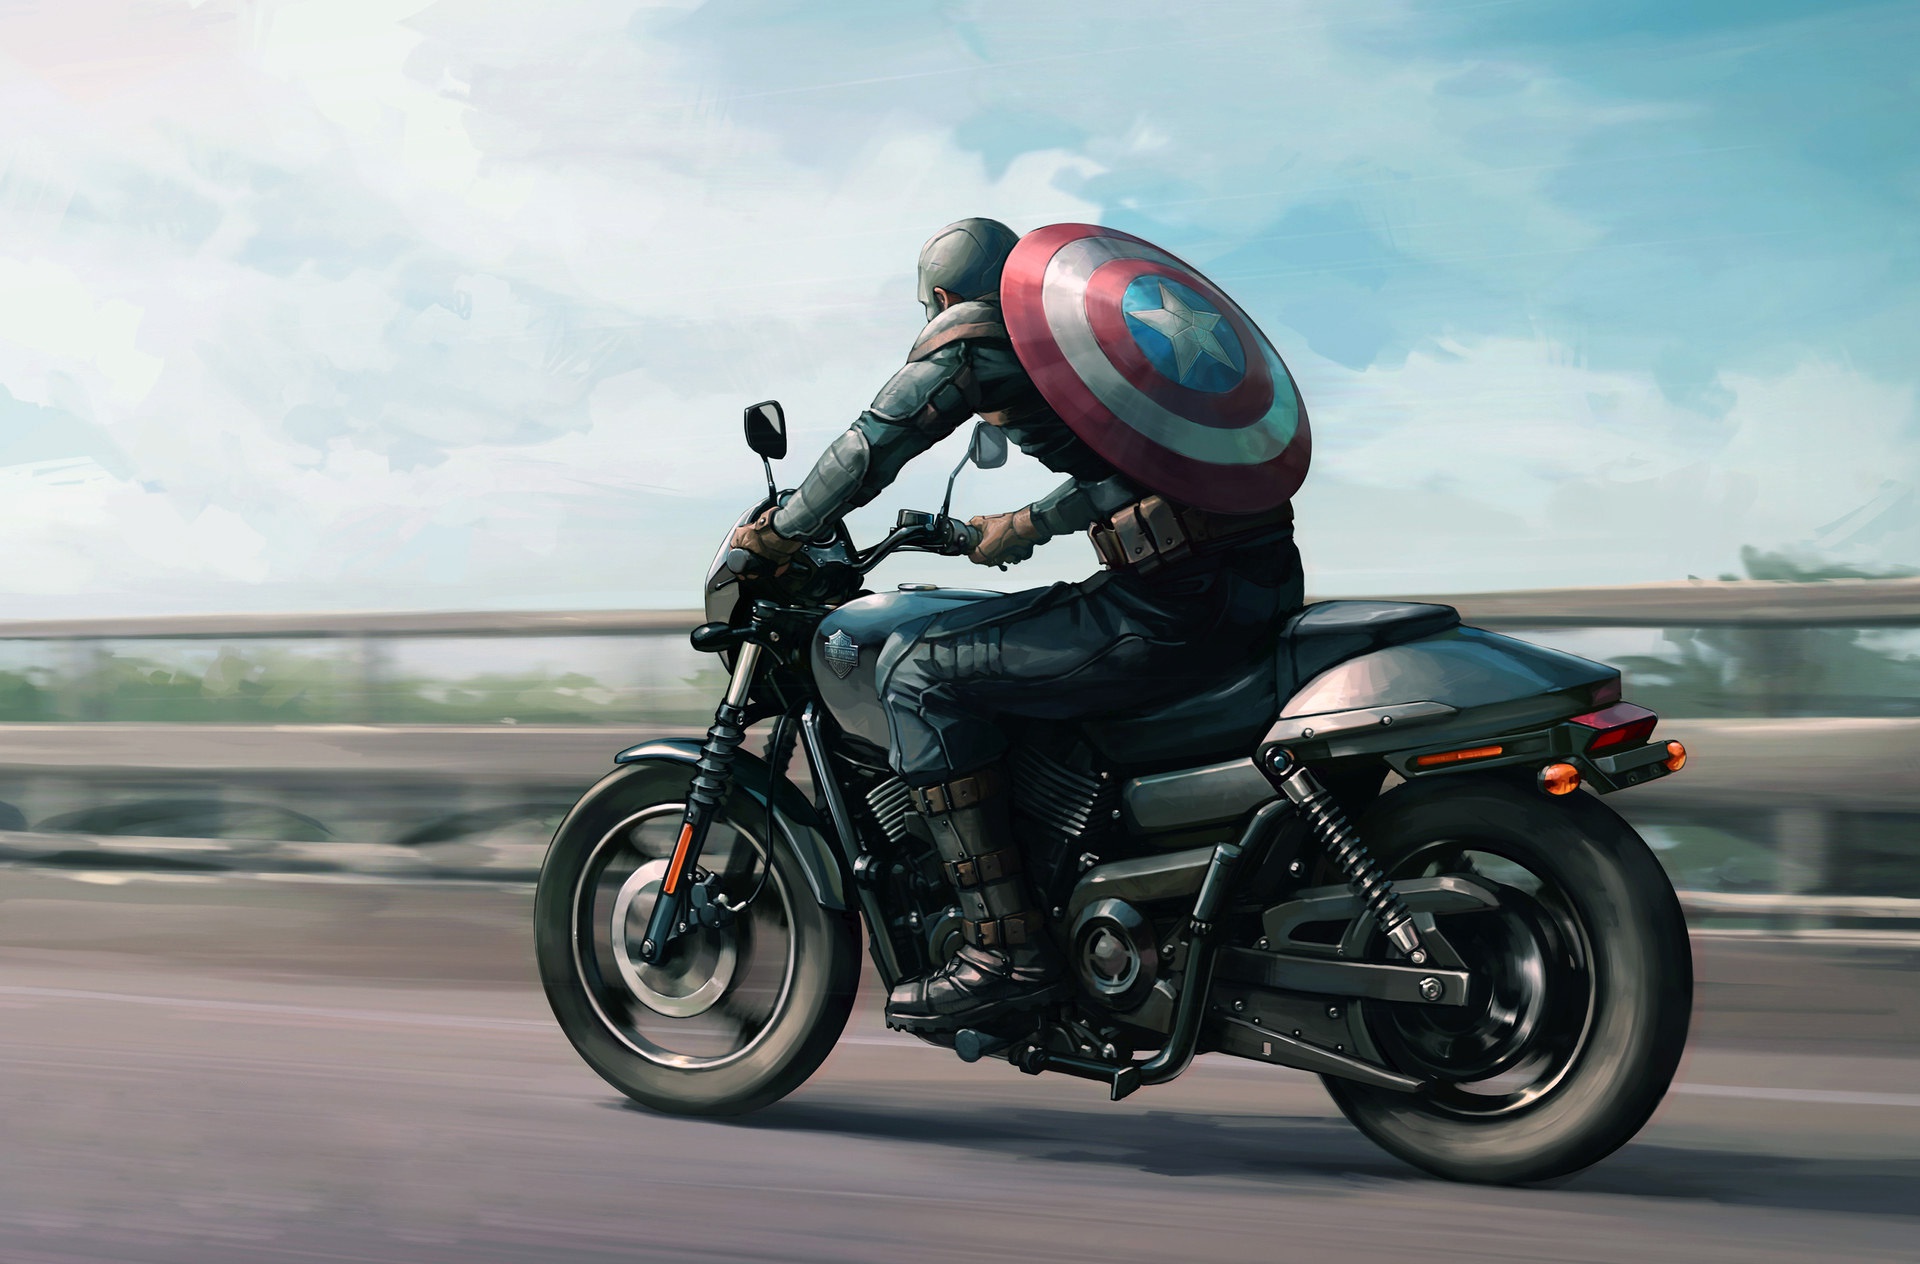 captain america: the winter soldier, harley davidson, comics, captain america, motorcycle